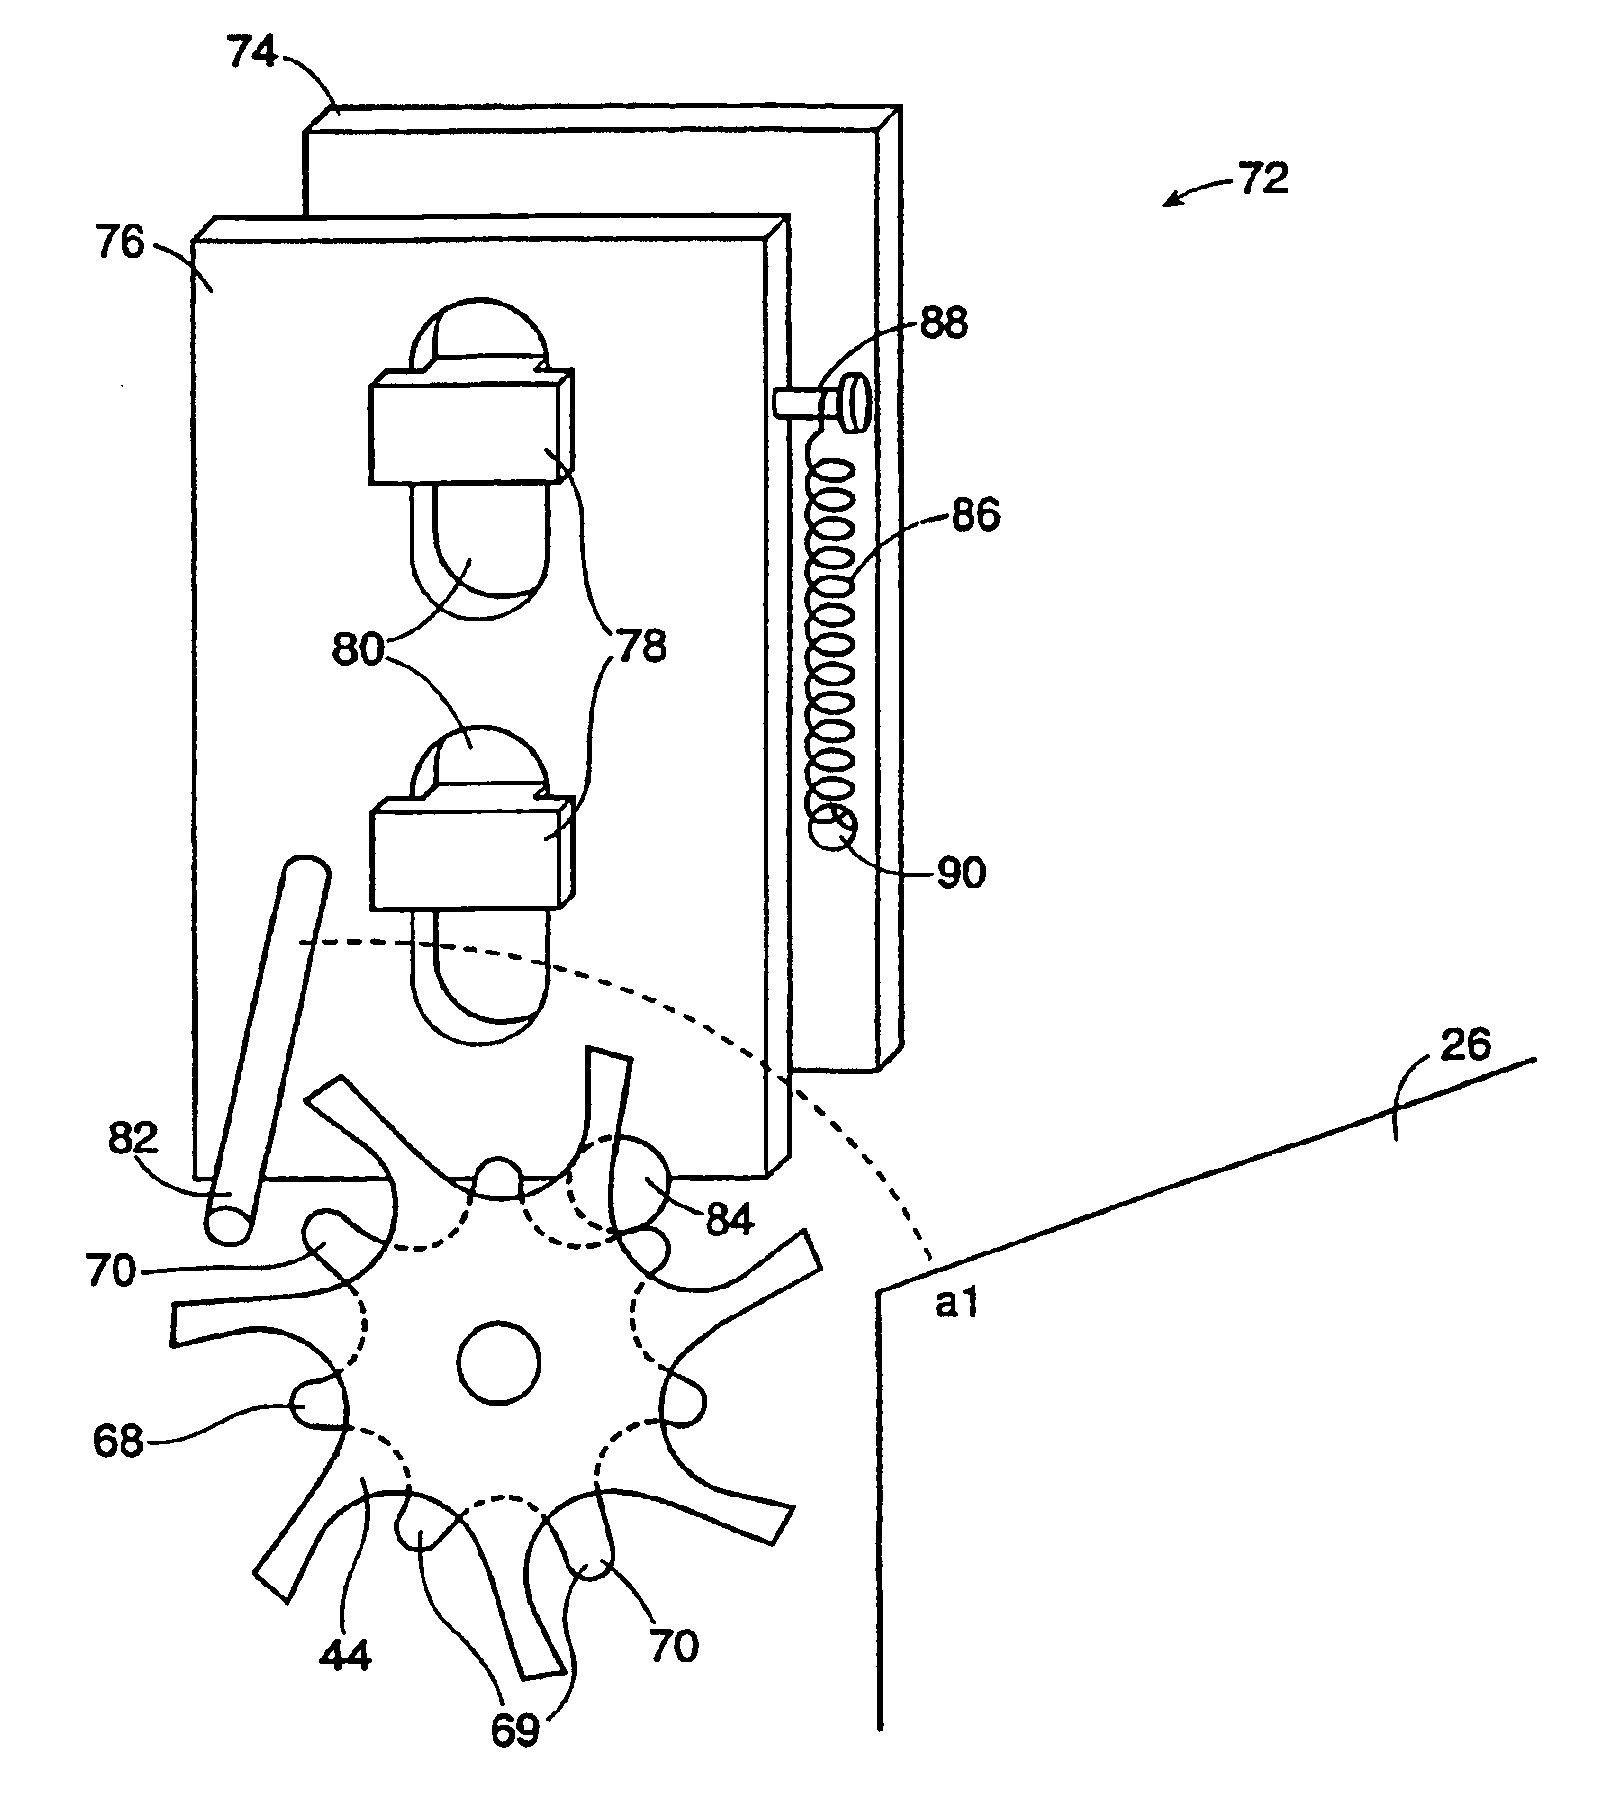 Coin roll dispenser and system incorporating same